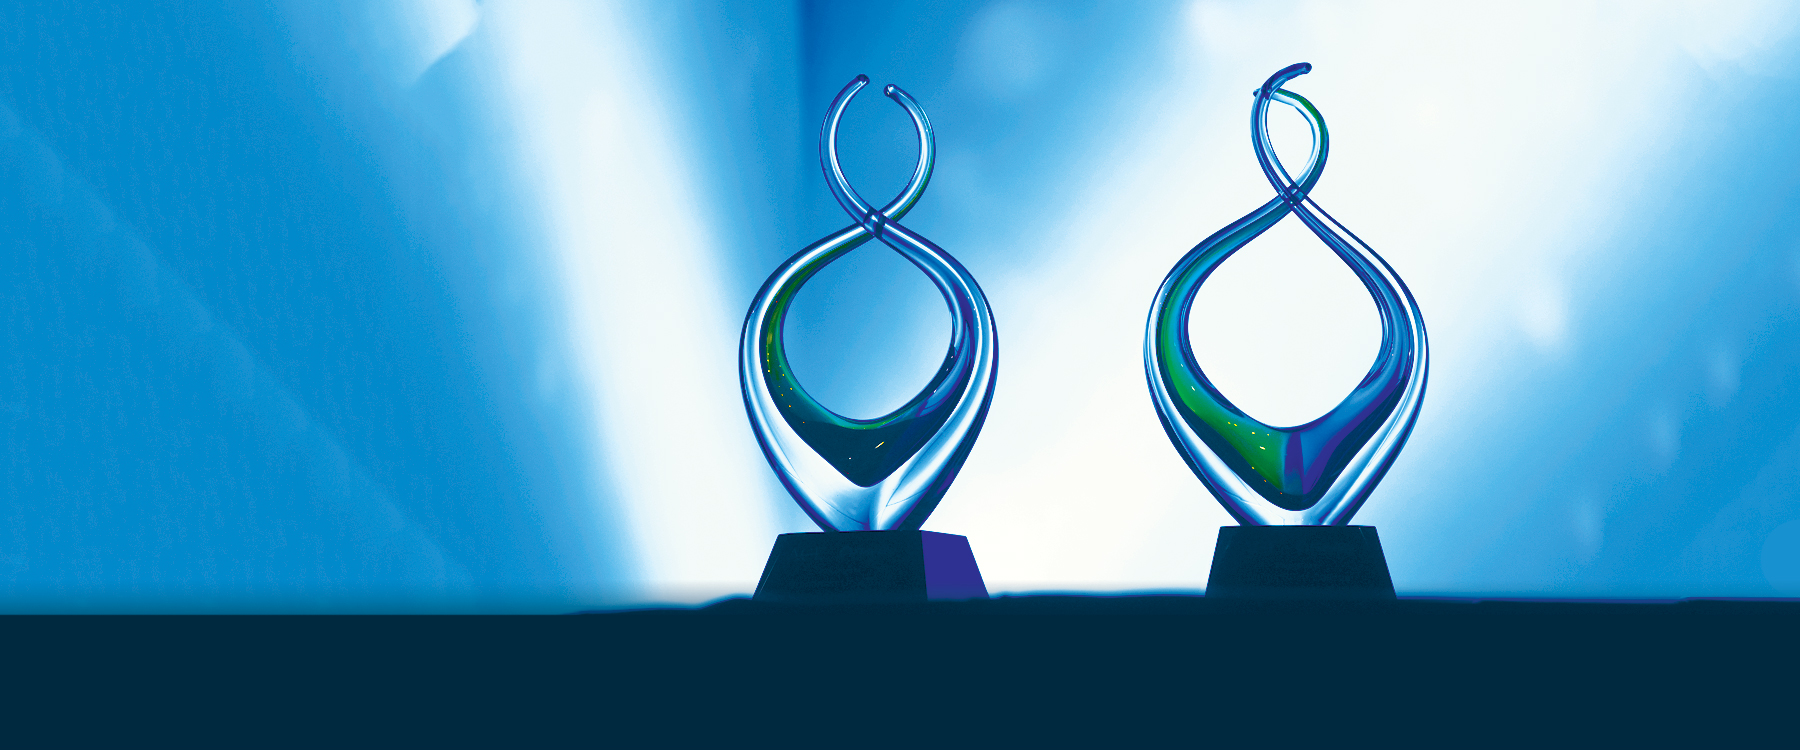 A picture of glass award sculptures on a table